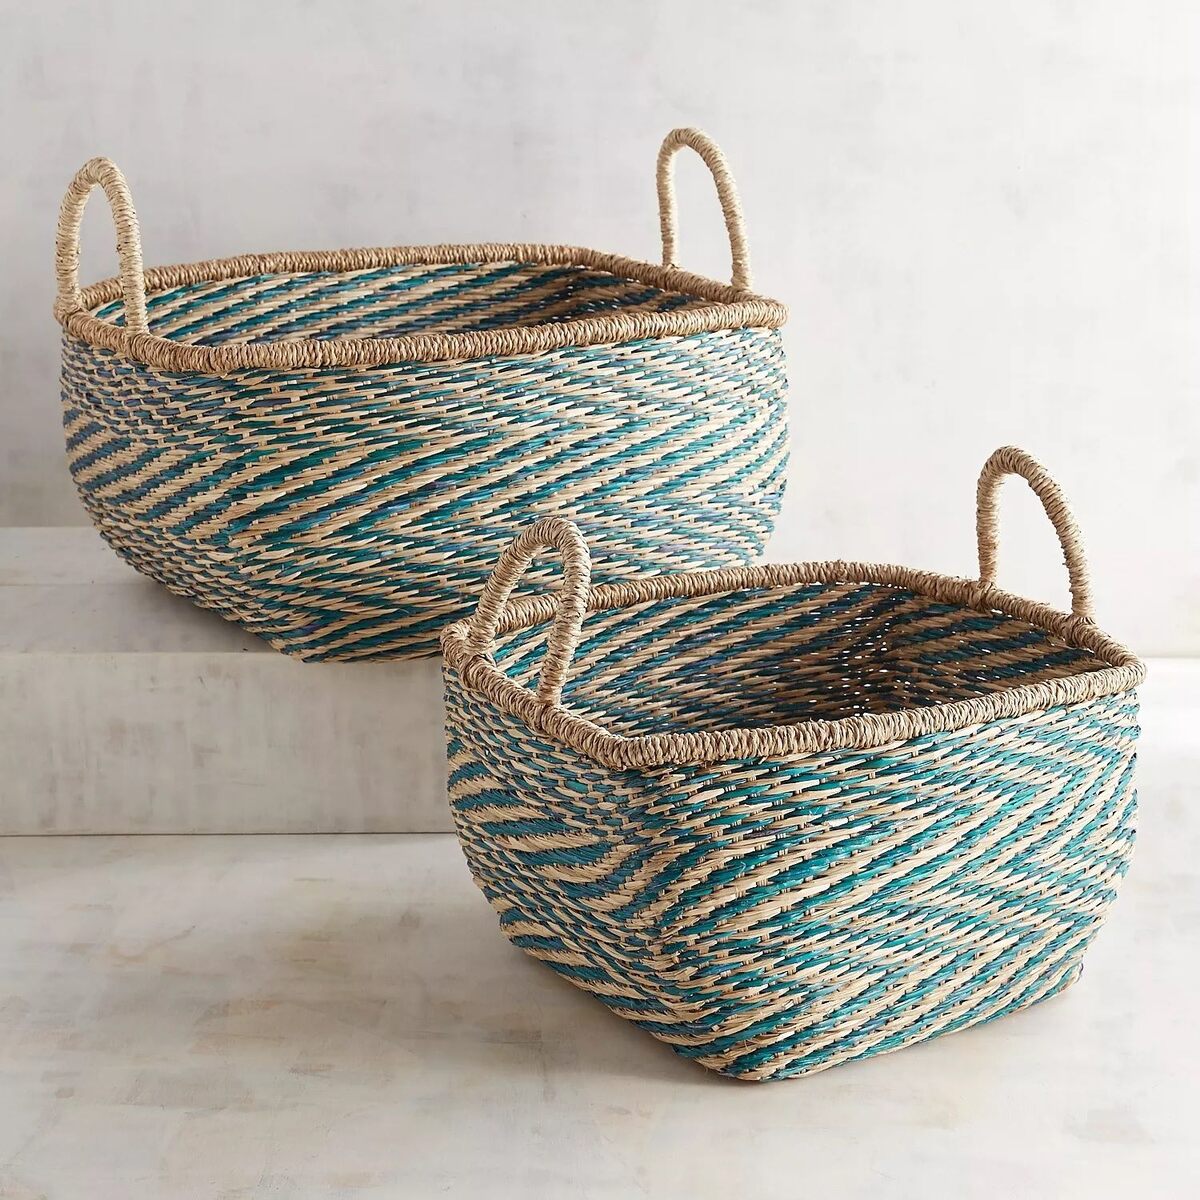 How To Get The Smell Out Of Seagrass Baskets